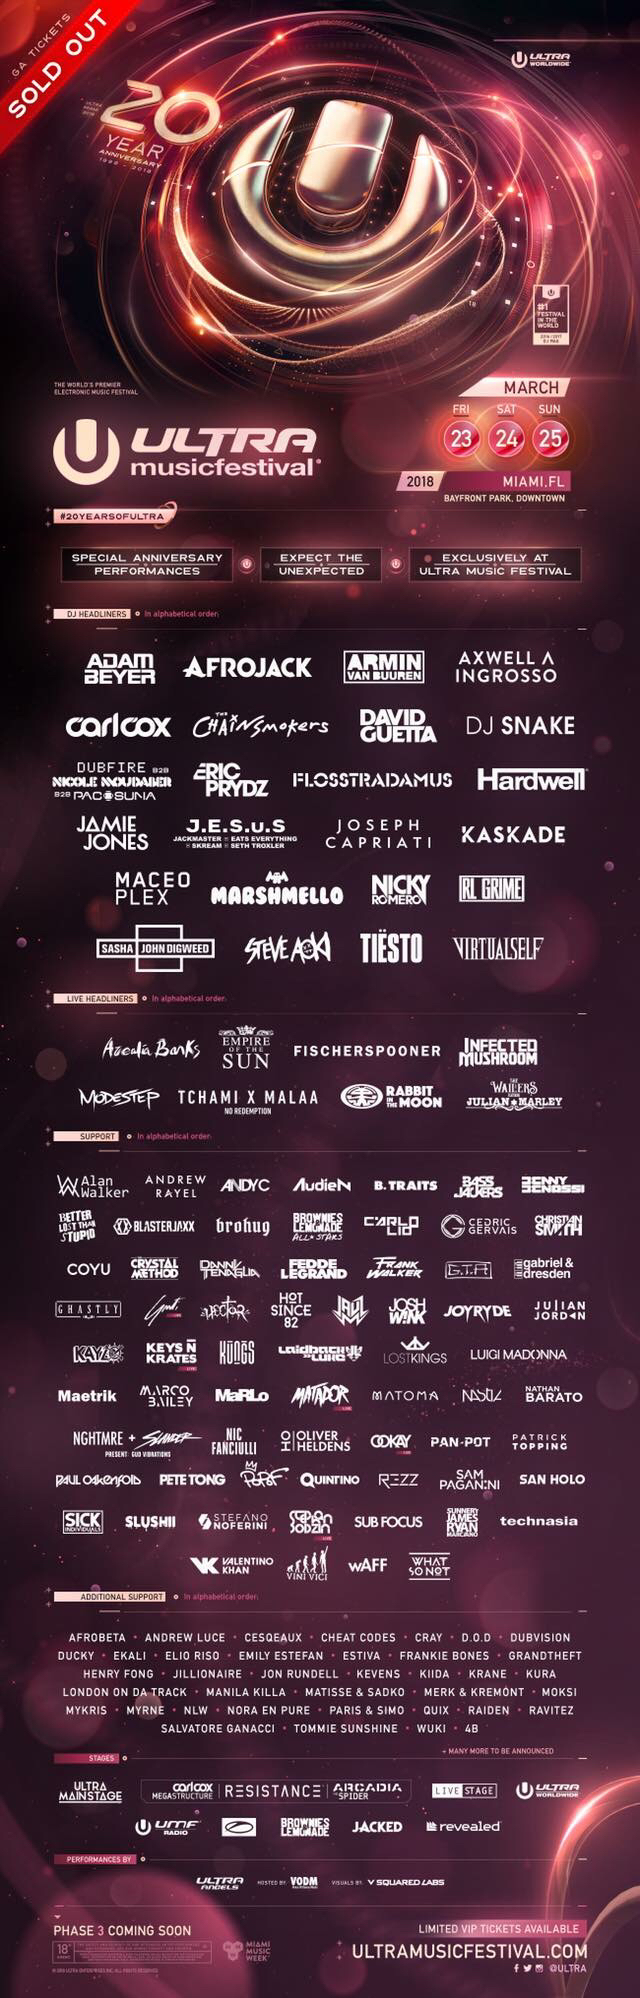 Ultra Music Festival 2018 Phase Two Lineup